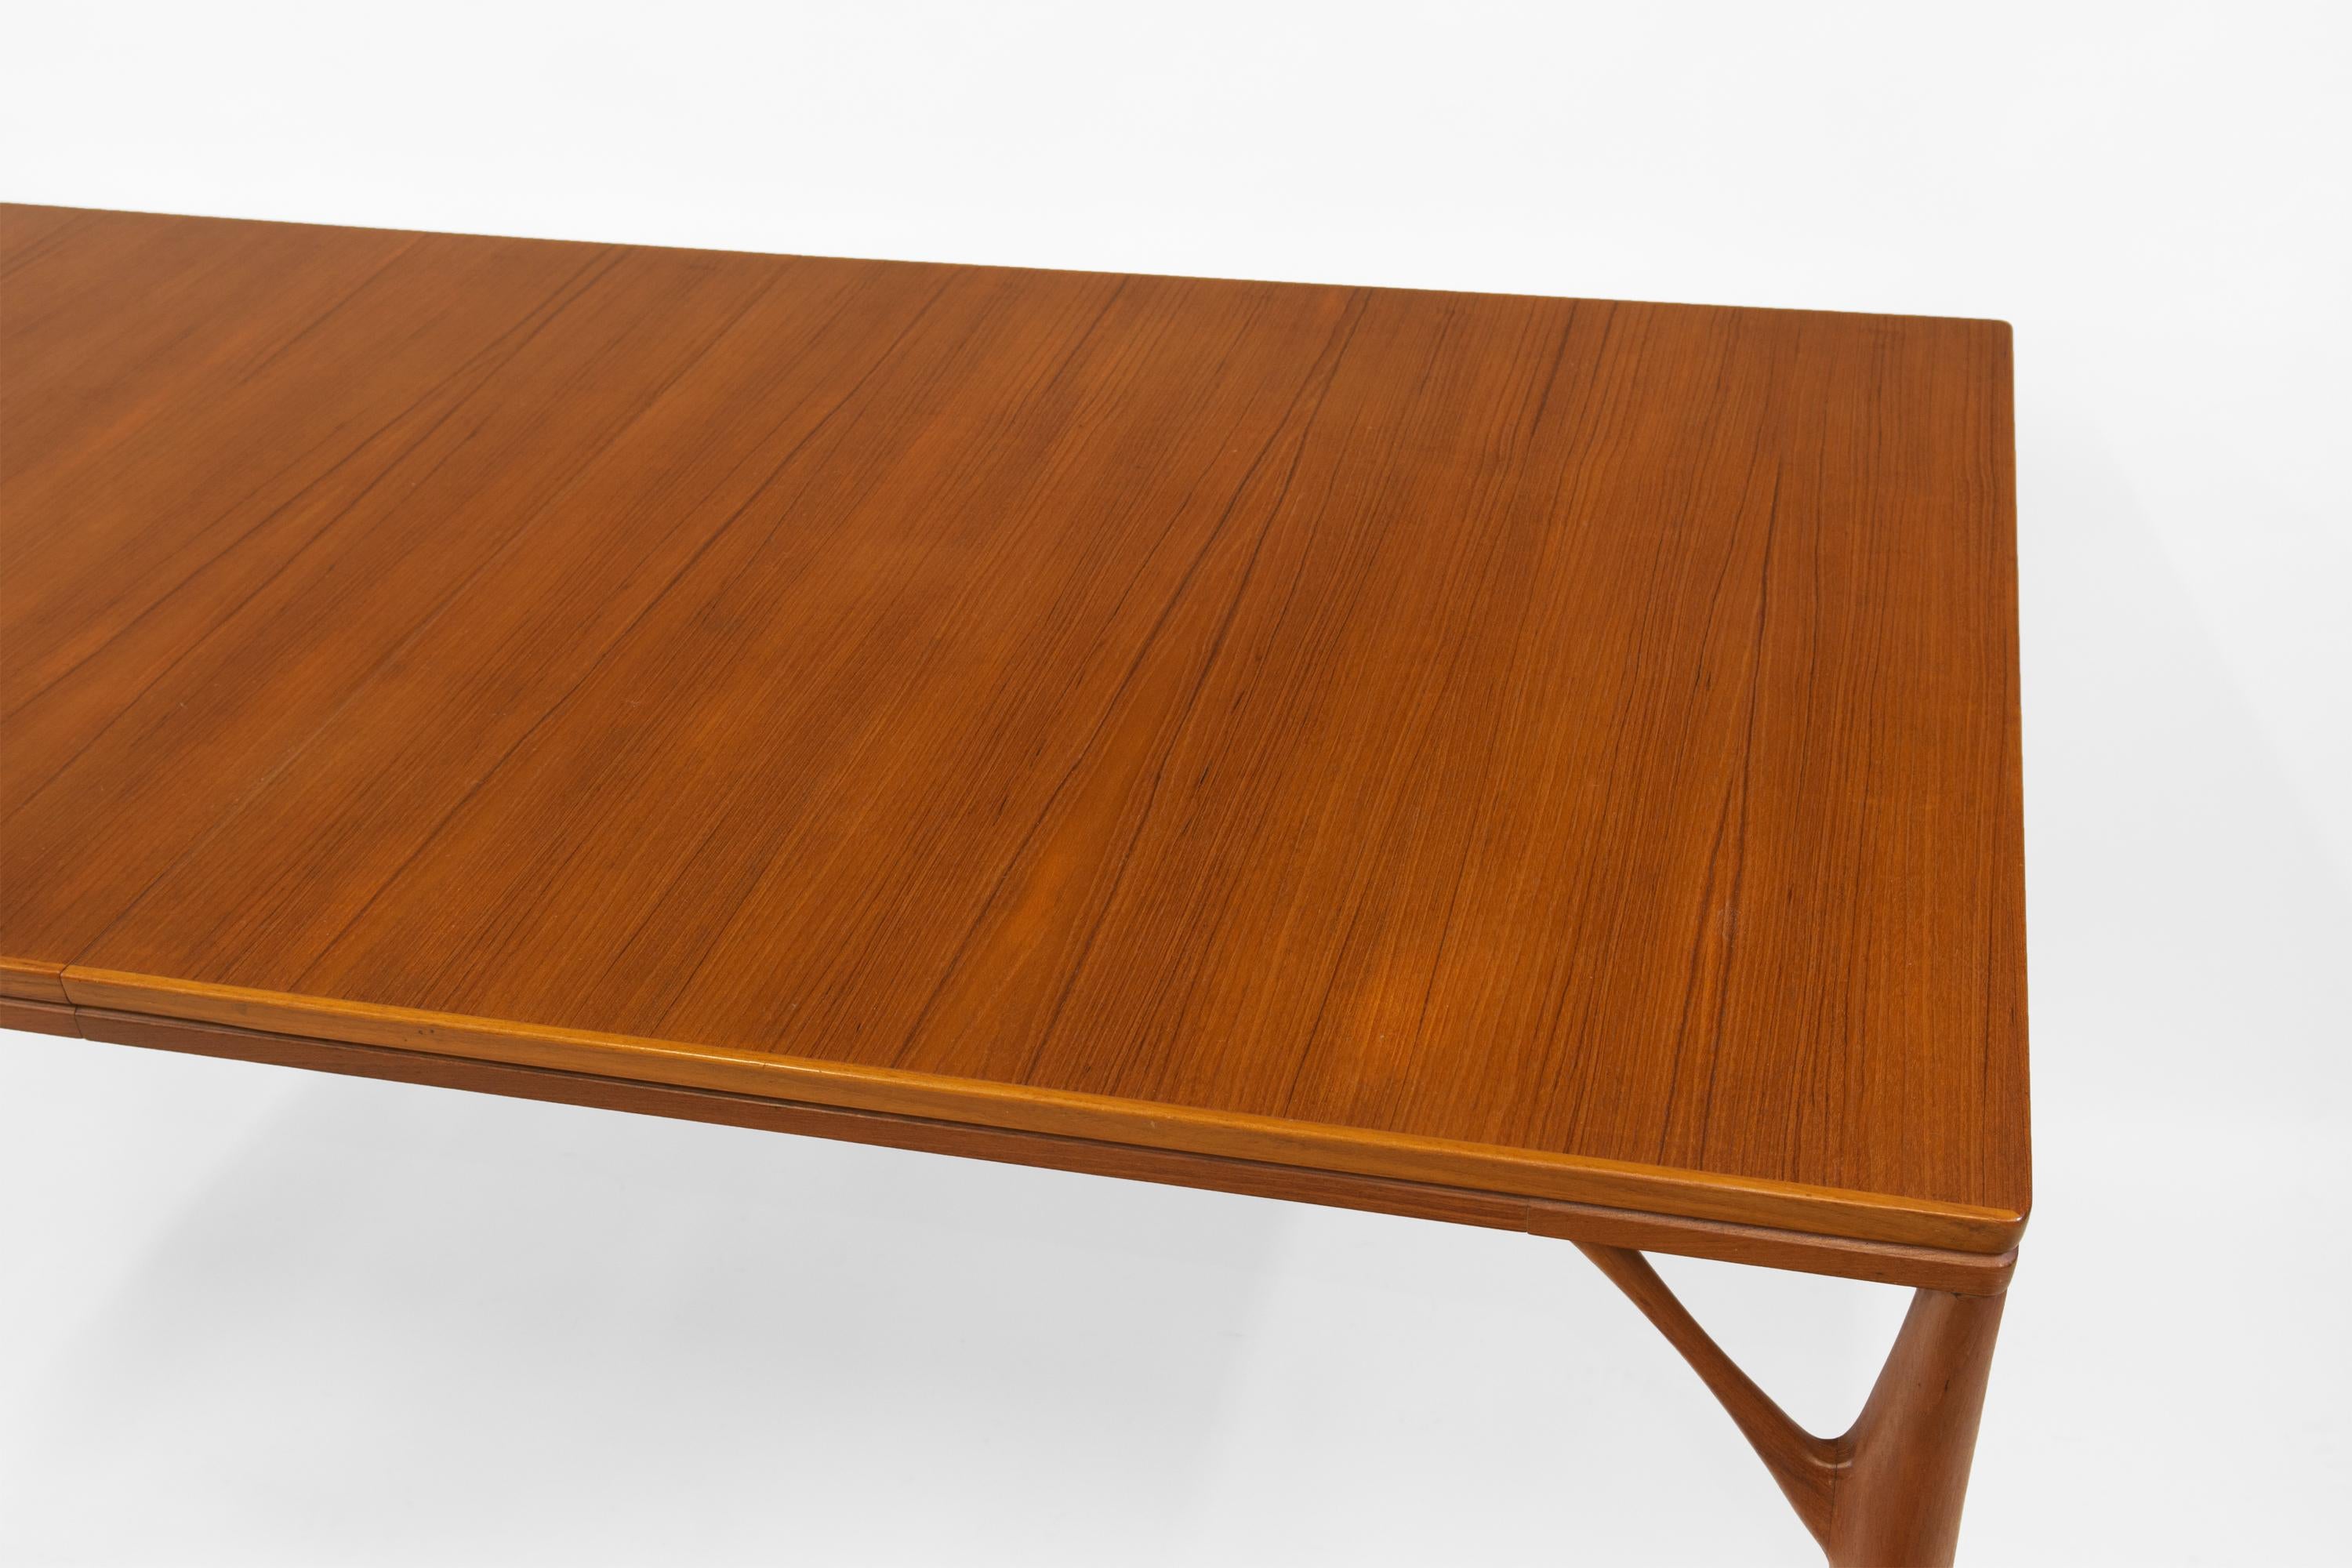 20th Century Danish Teak ‘Tree Leg’ Mid Century Extending Large Dining Table By H Sigh & Sons For Sale